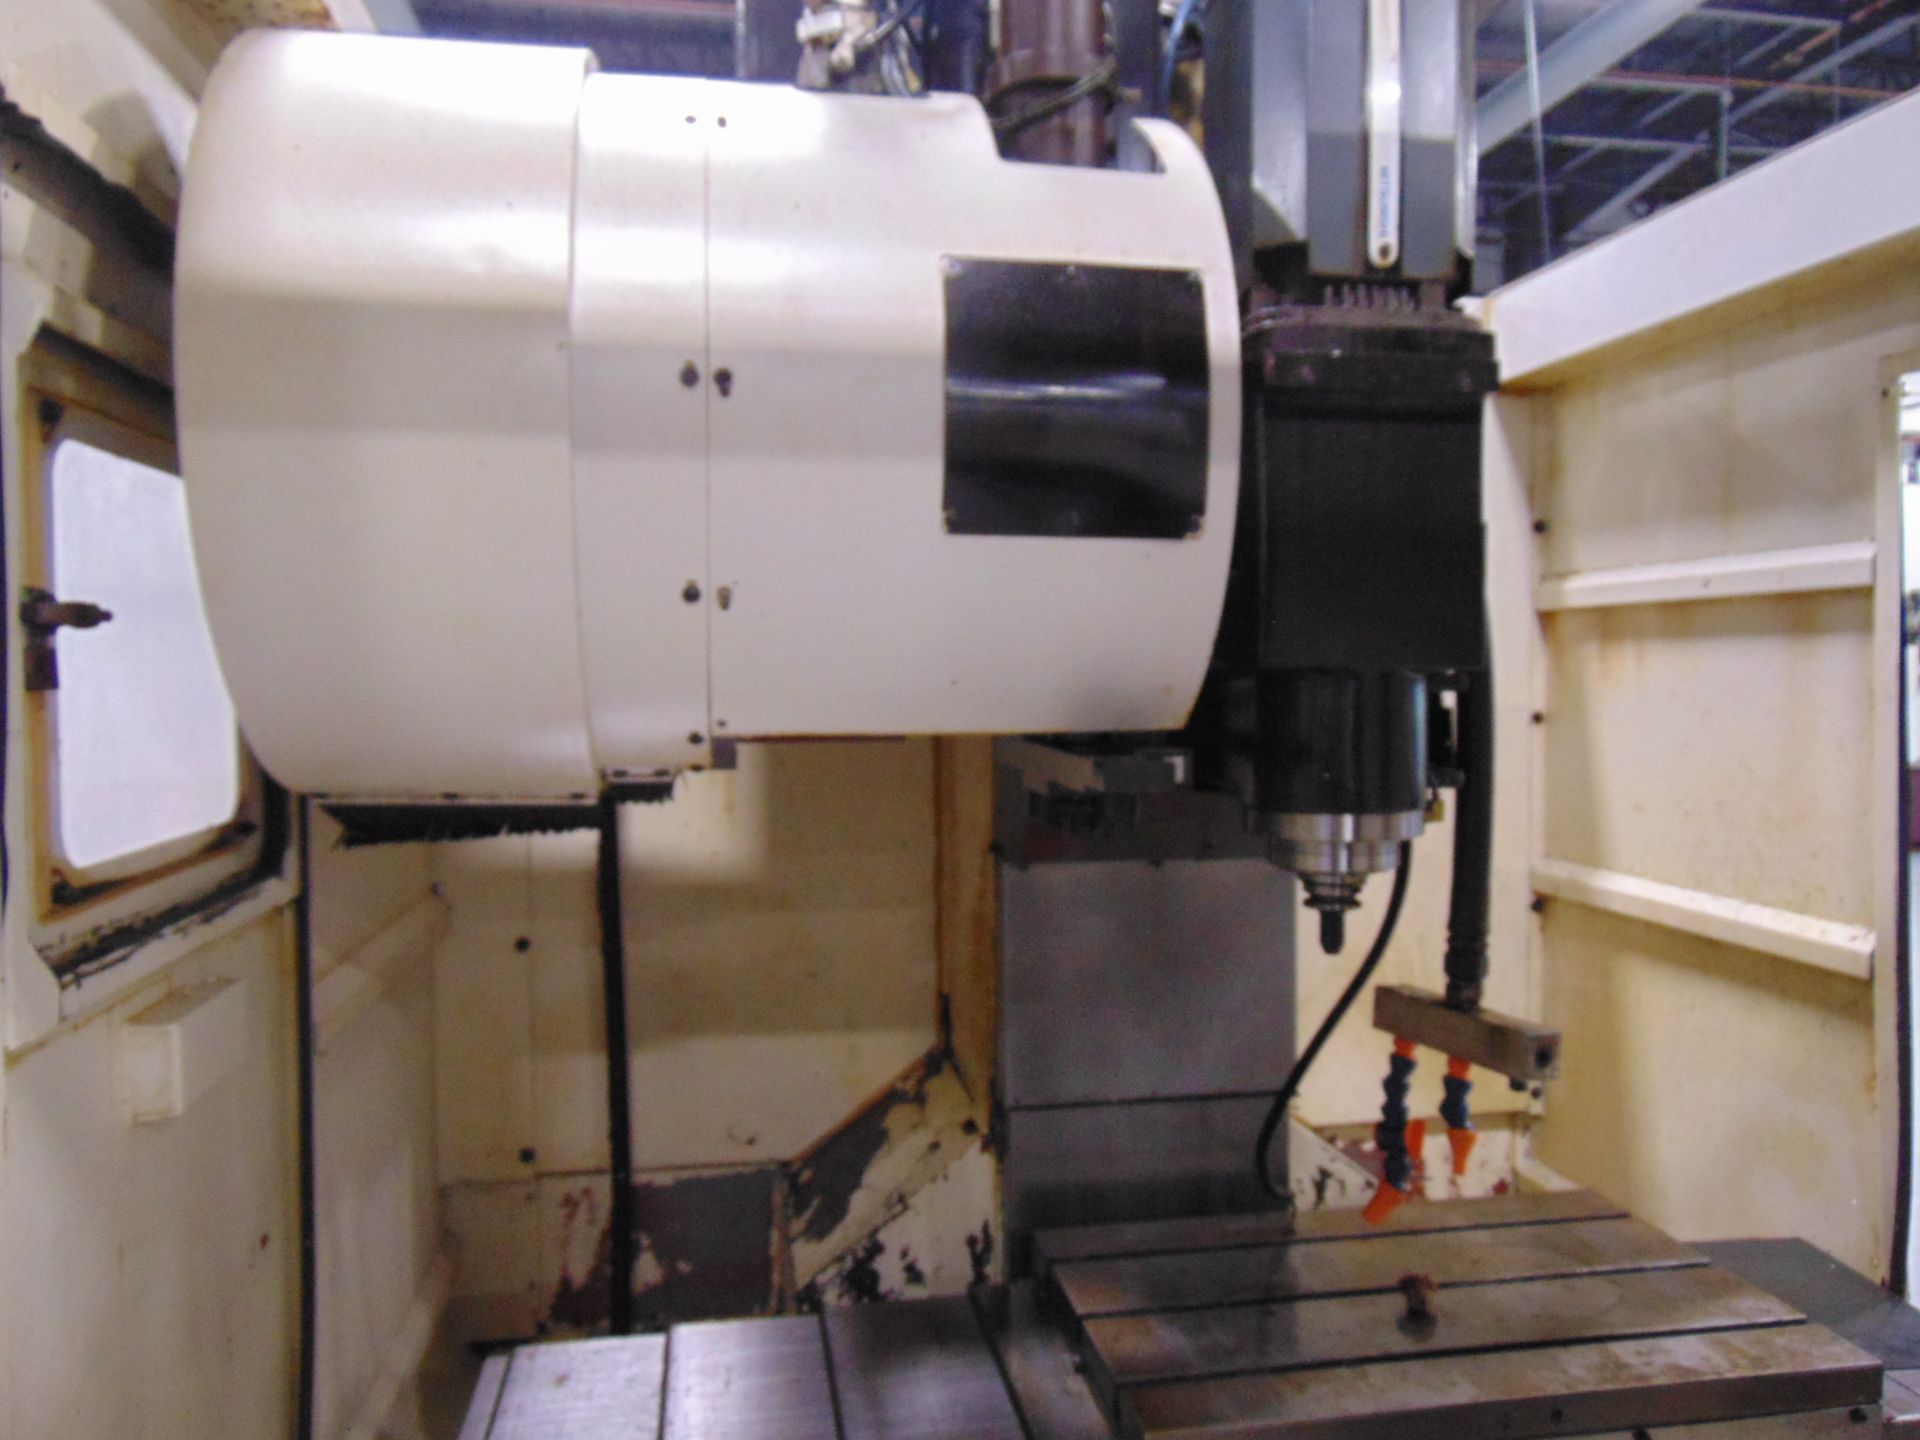 2007 ARES-SEIKI 3-AXIS CNC VERTICAL HIGH-SPEED DRILL/TAP MACHINE, W/ GOLDEN SUN 4TH AXIS ROTARY TABL - Image 6 of 15